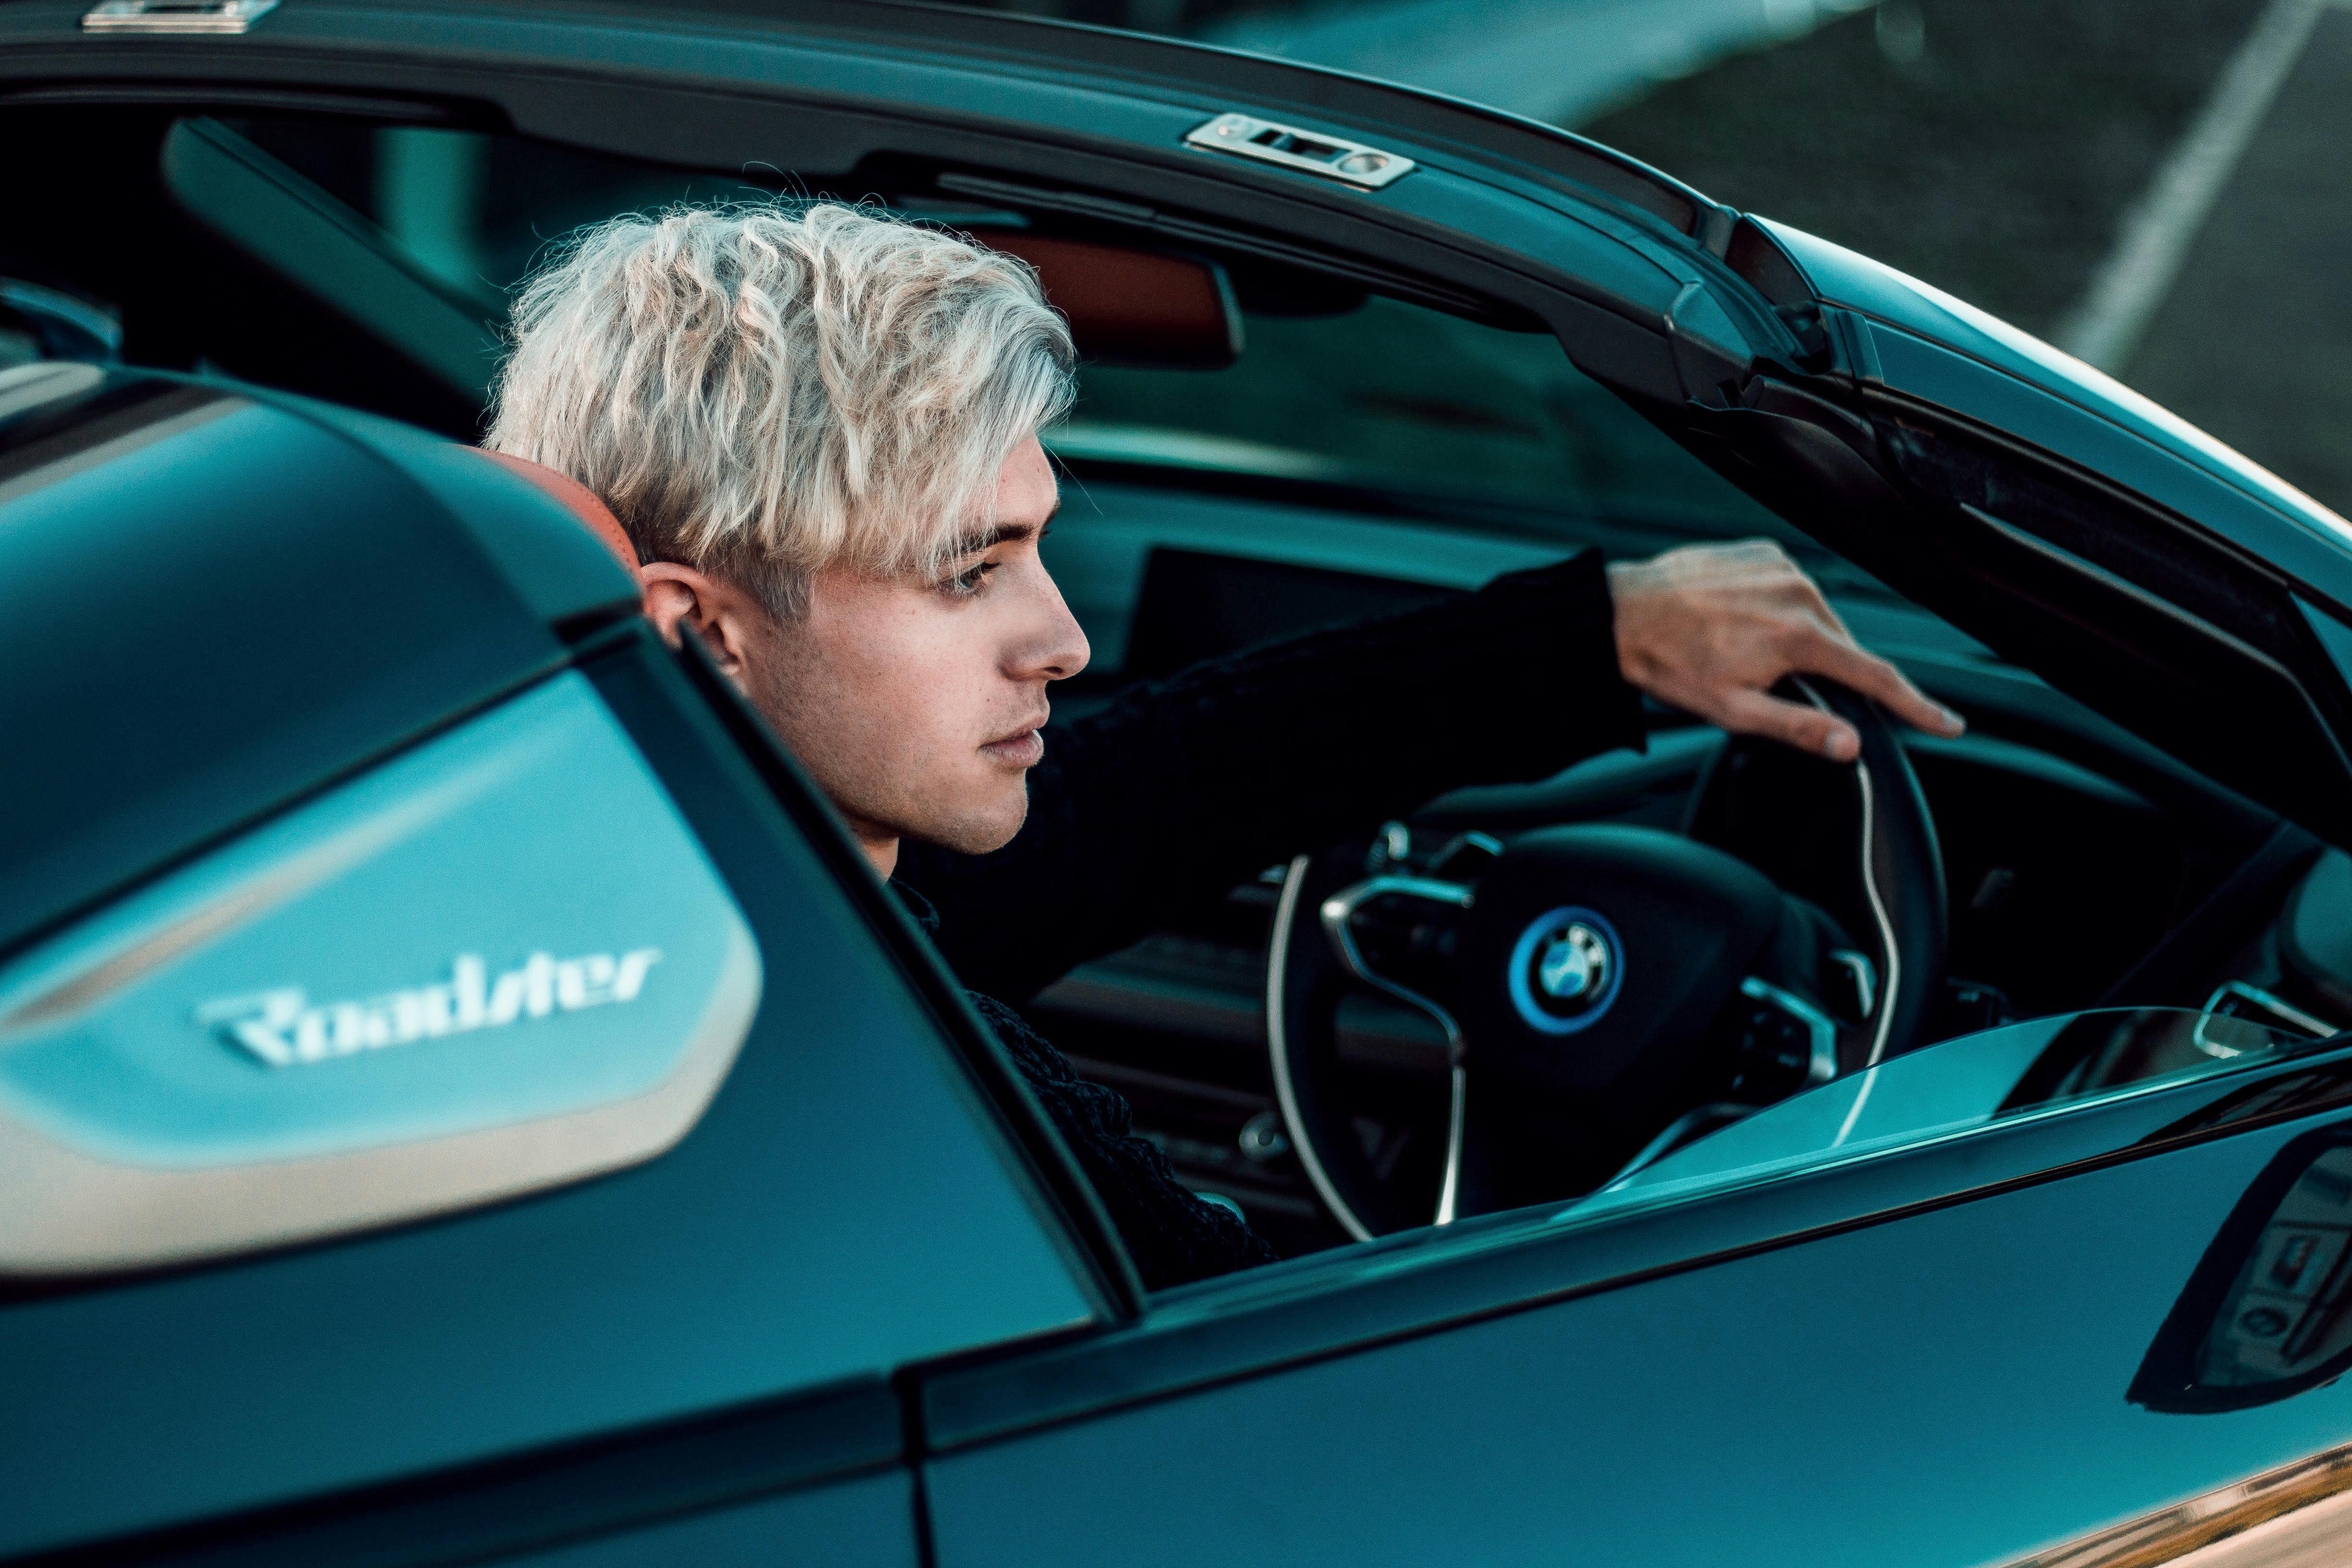 Follow Me On Instagram @deetzblom | Shoot done with BMW and Luxuria Lifestyle - Non-Copyrighted Find out what I'm doing behind the scenes https://www.instagram.com/deetzblom/ https://versysmedia.com/